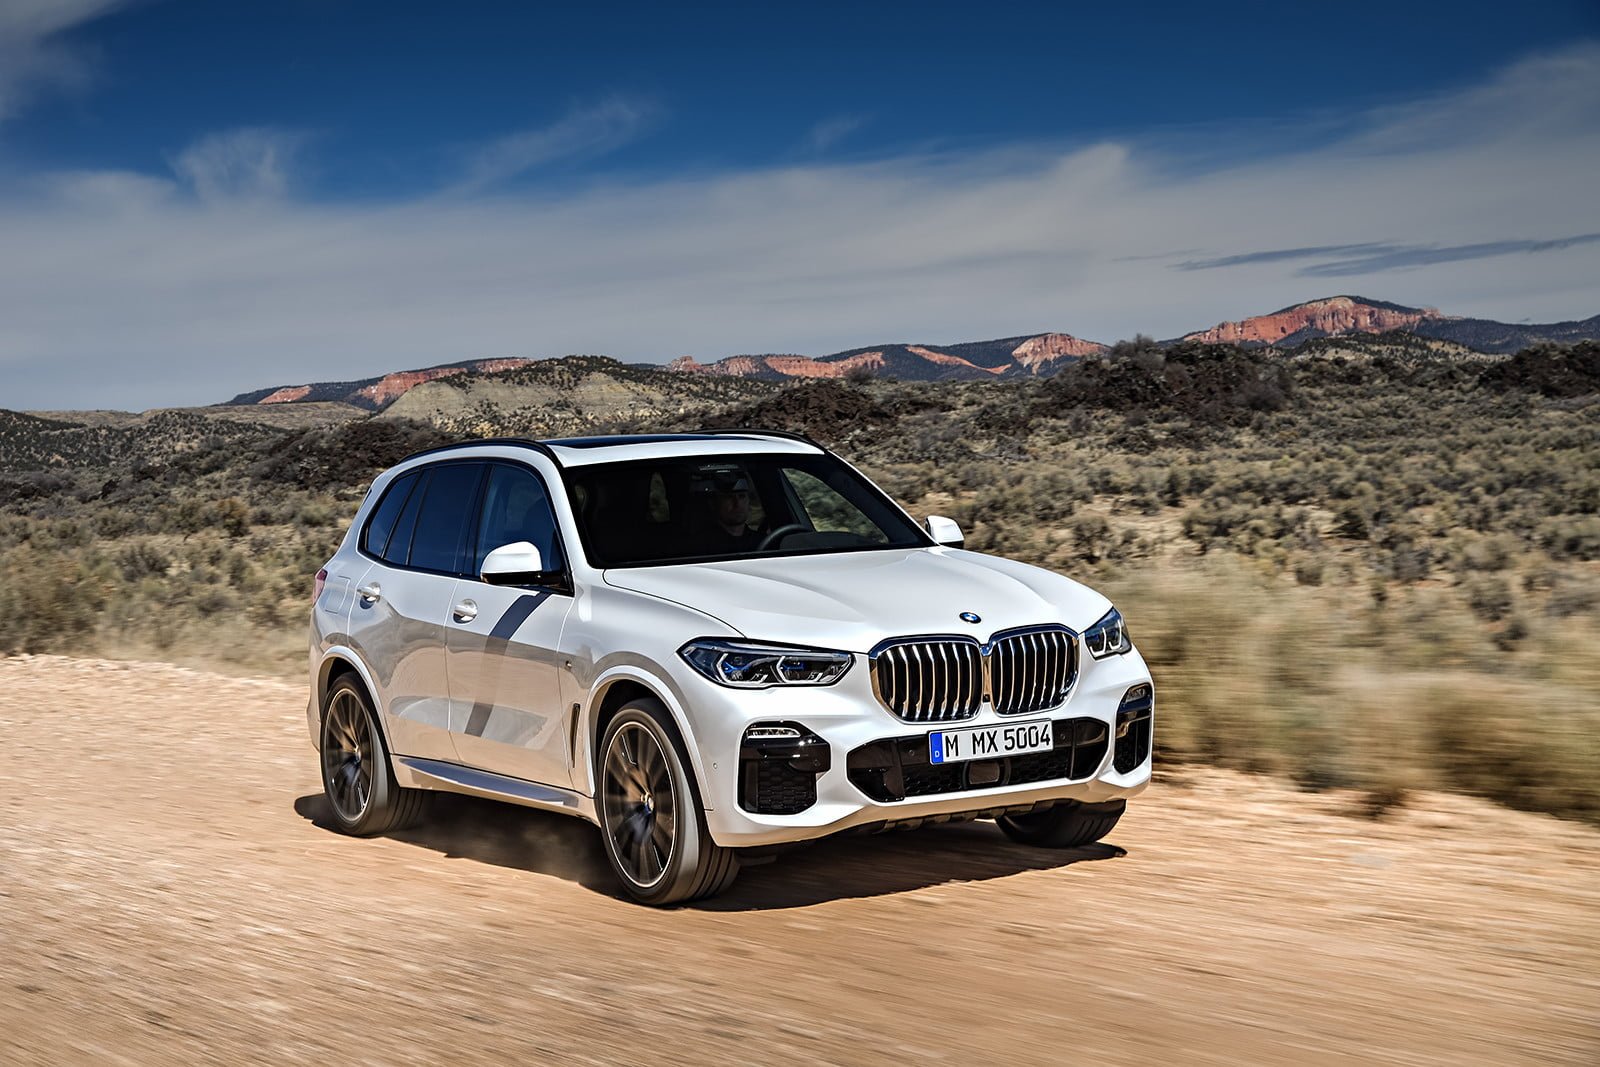 Next Gen BMW X5 Suv Price and Review